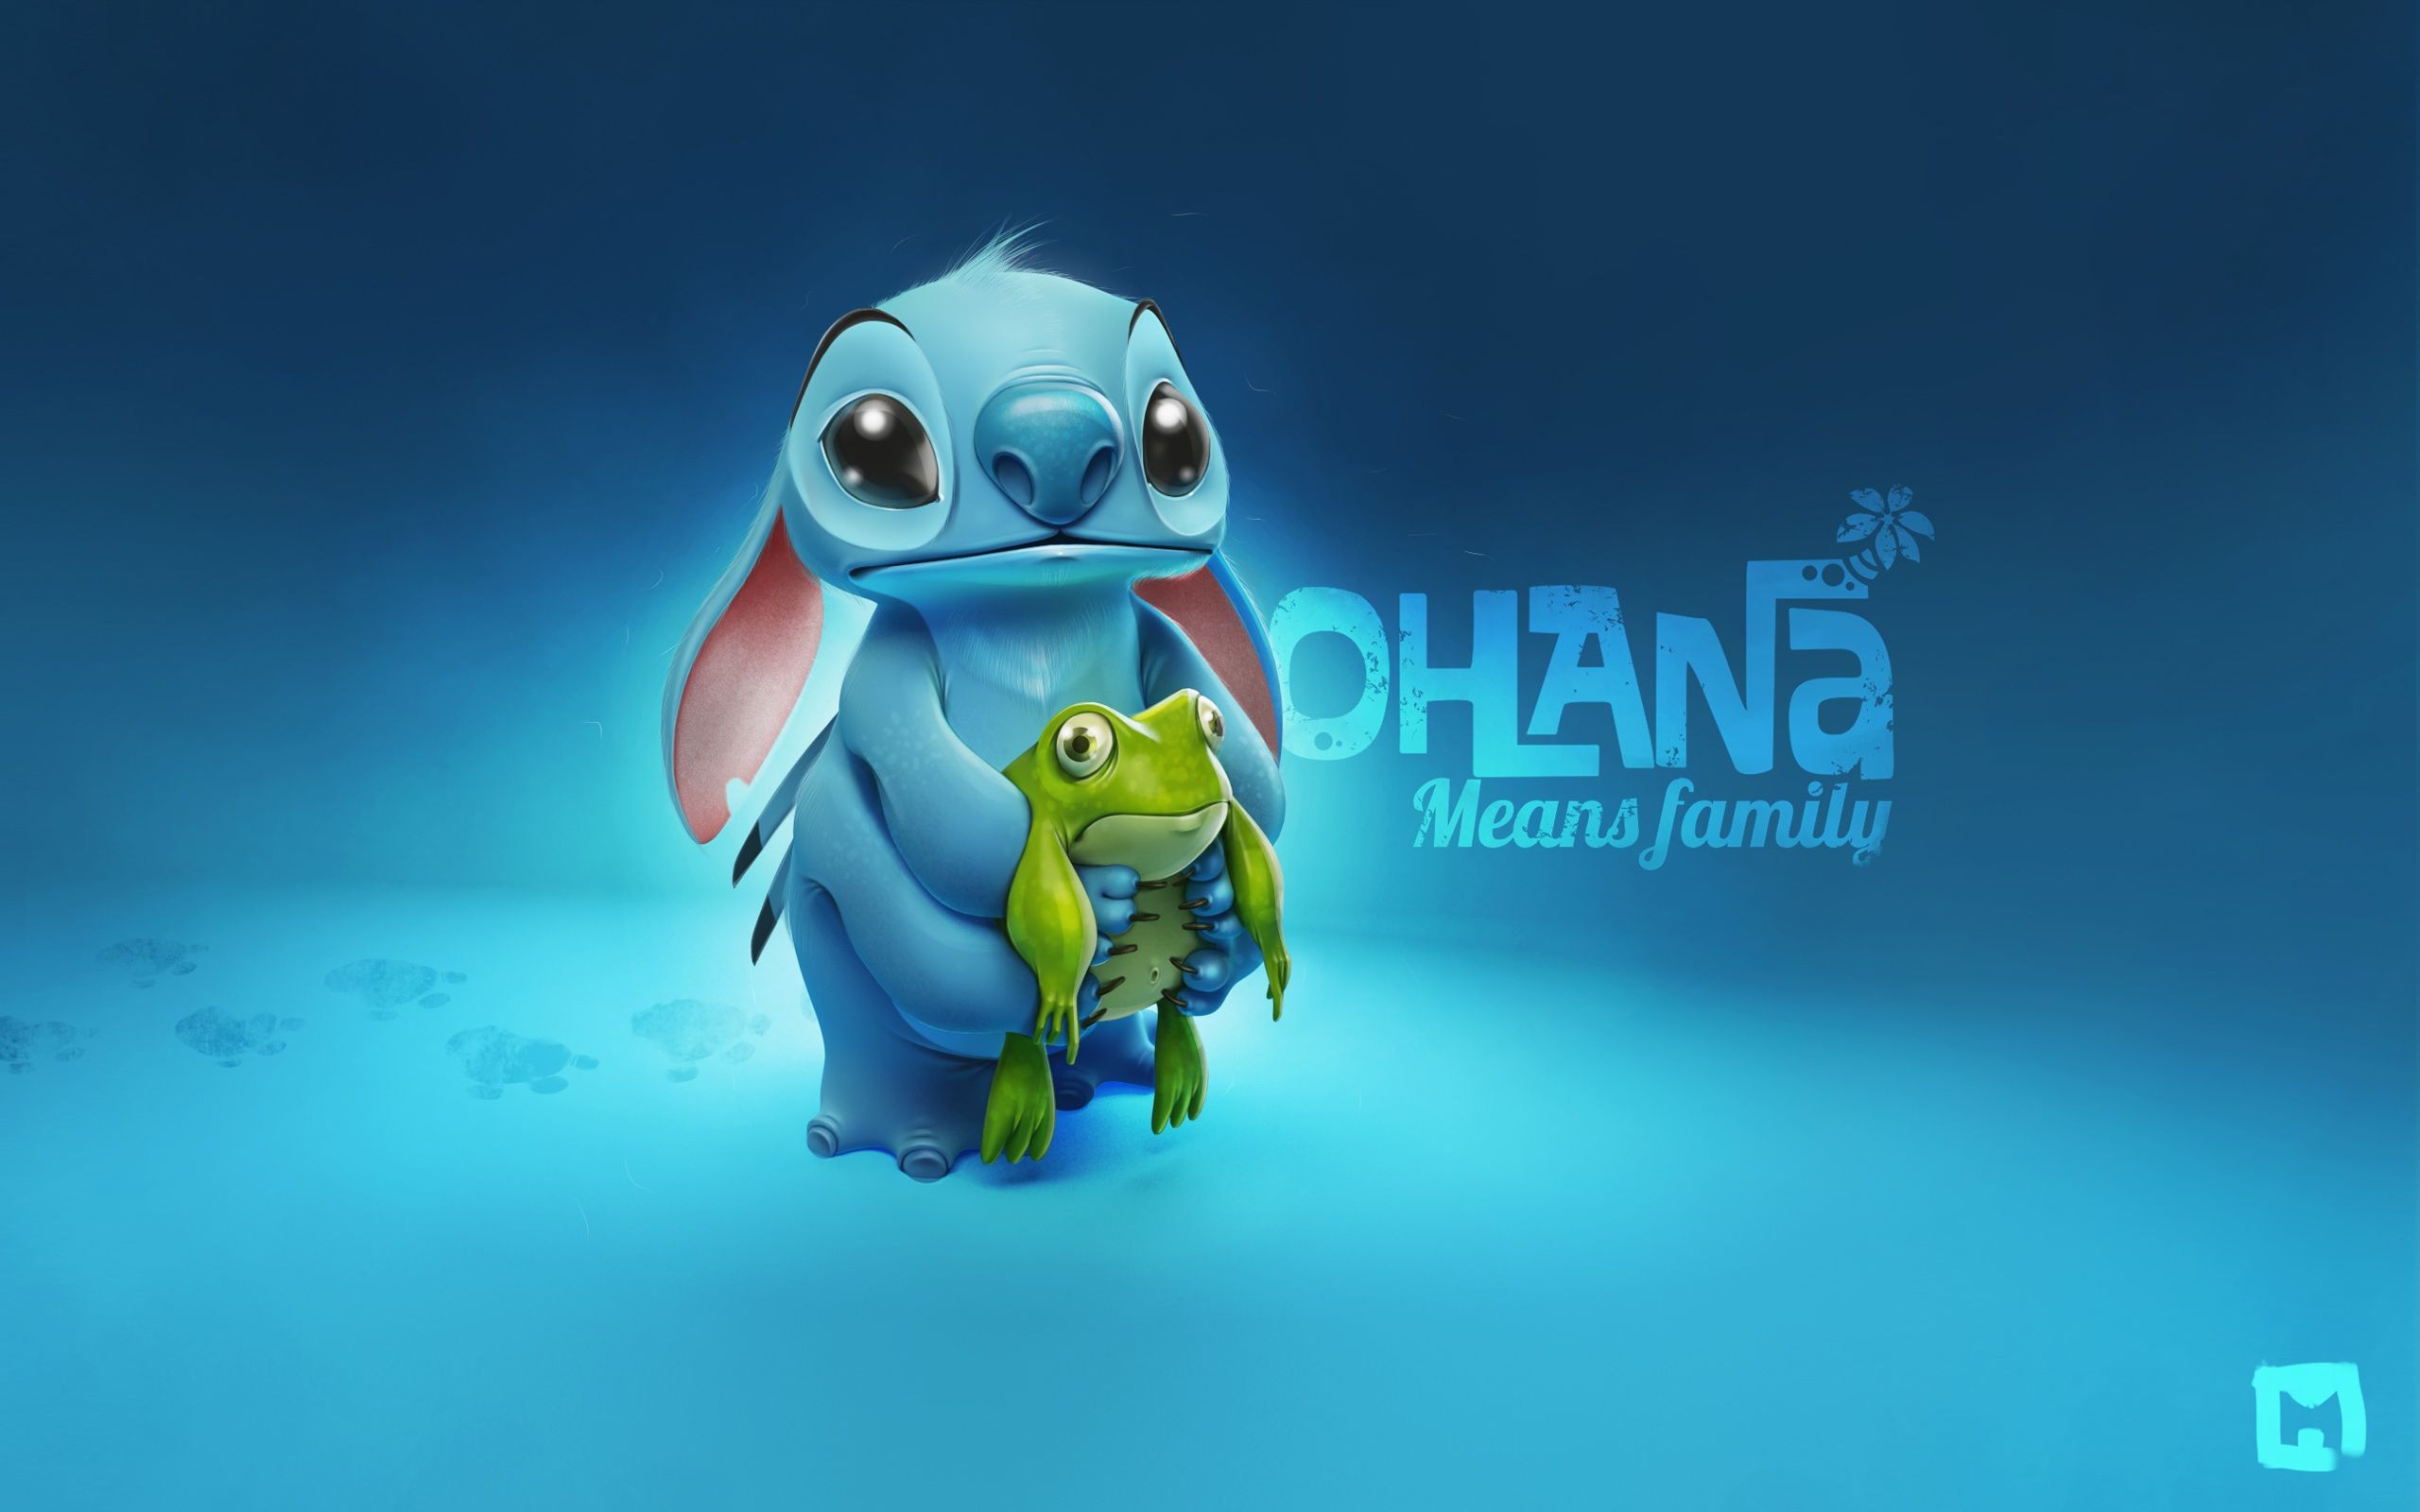 stitch wallpaper download free cool wallpapers for desktop